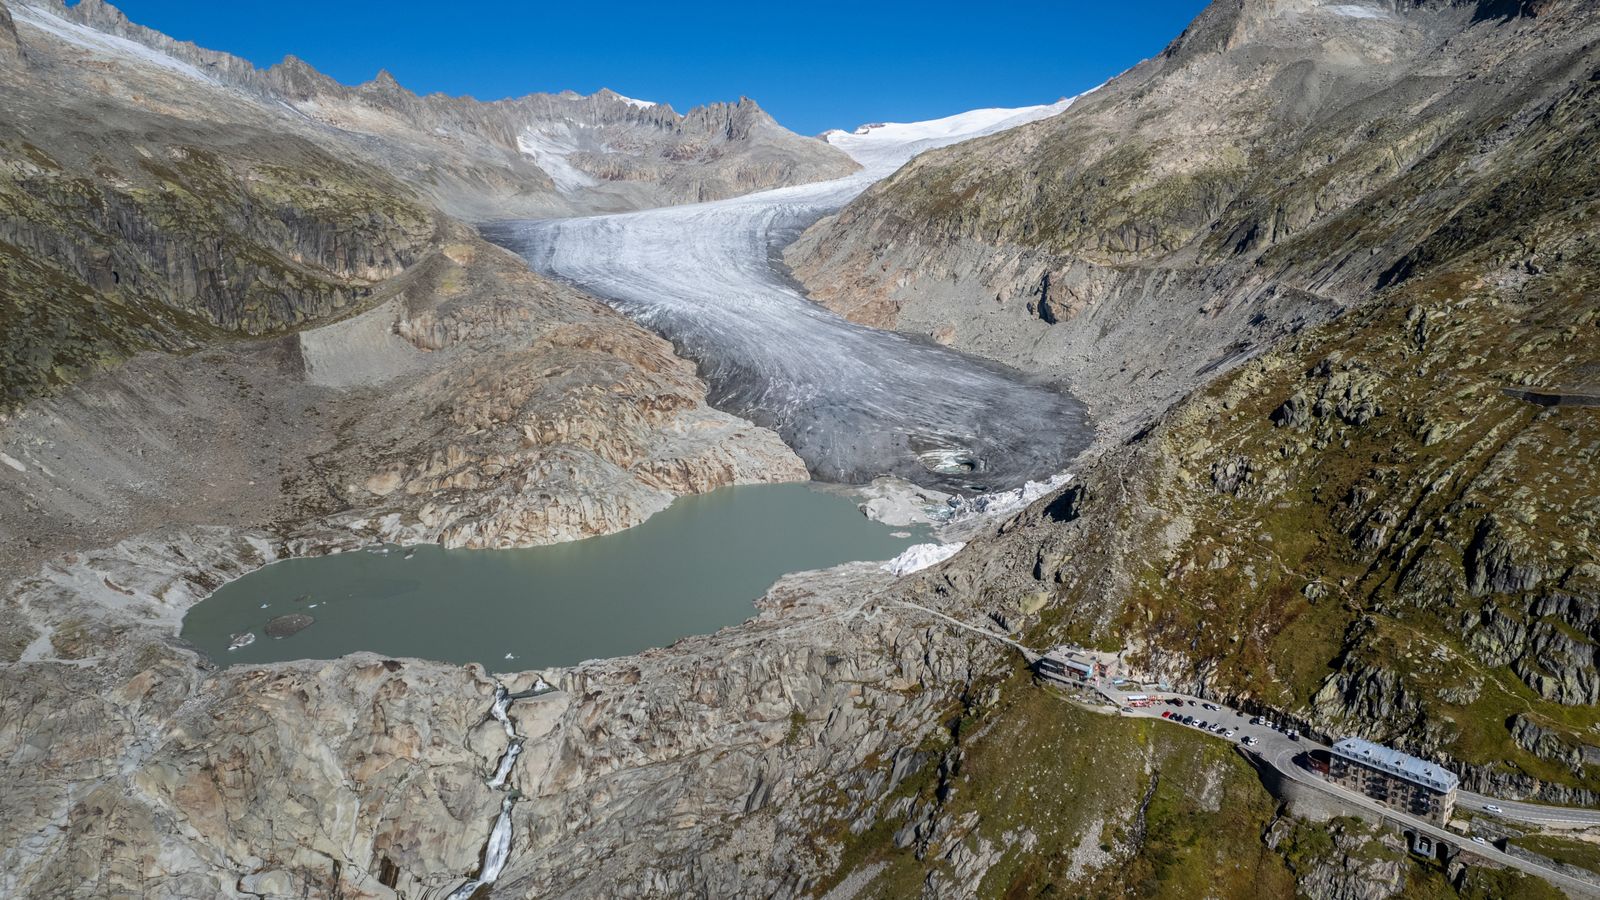 Switzerland has lost 10% of its glaciers in just two years in 'catastrophic' ice melt